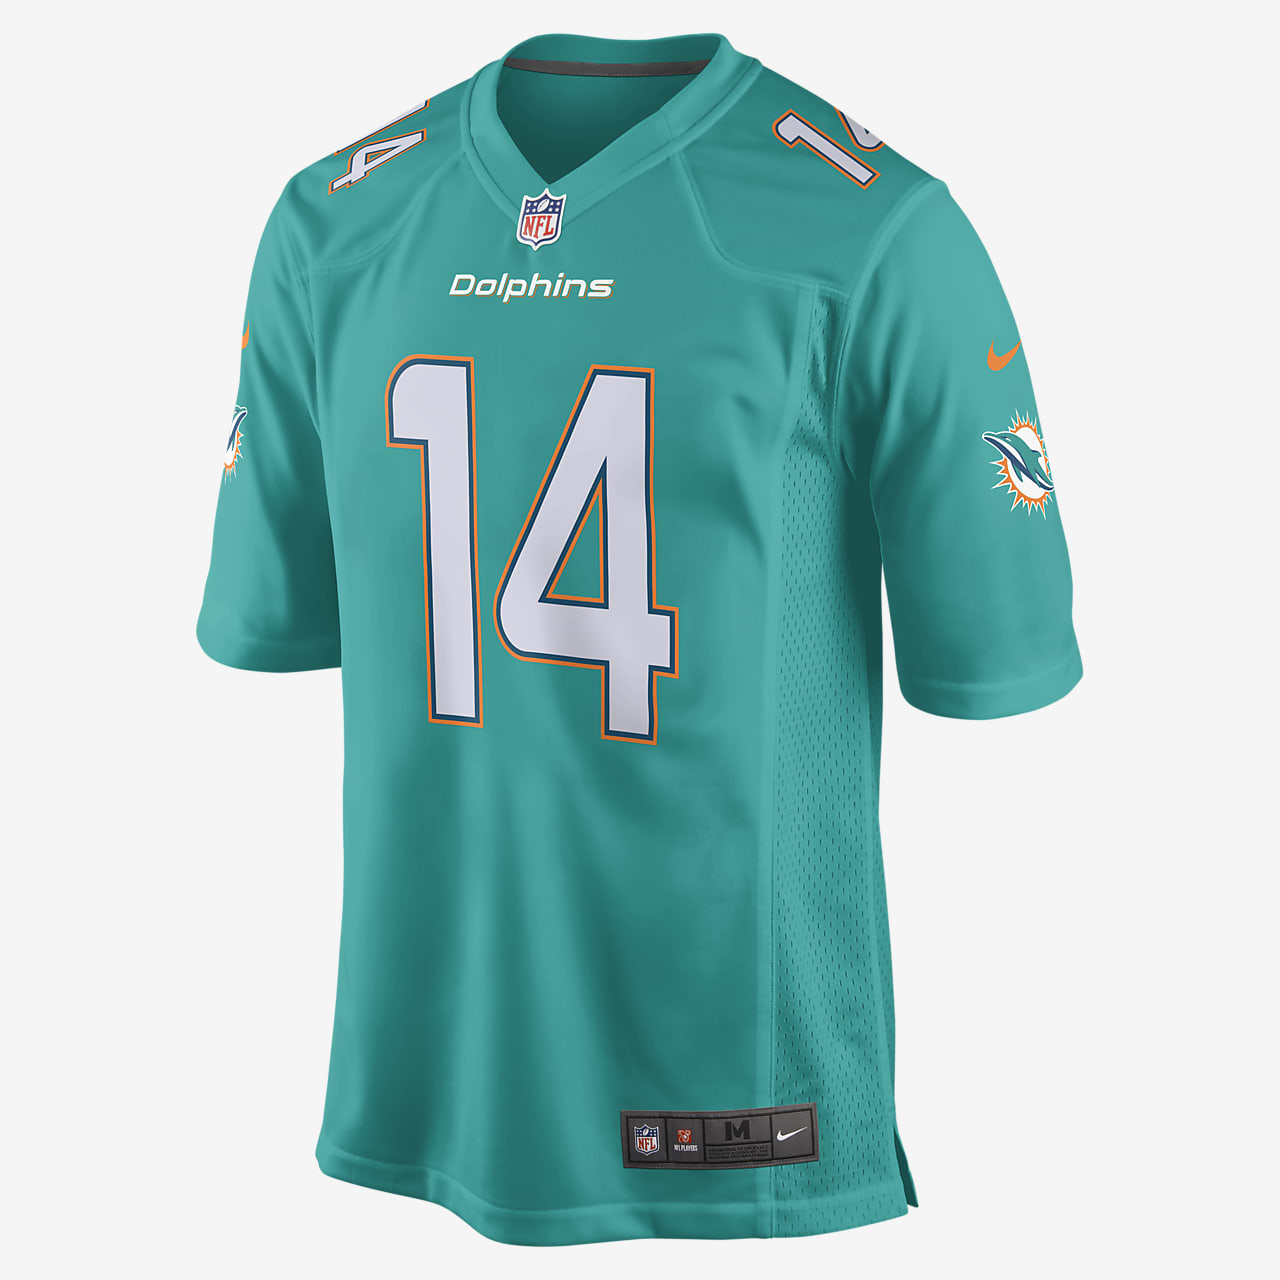 NFL Miami Dolphins (Jarvis Landry) Men's American Football Home Game Jersey